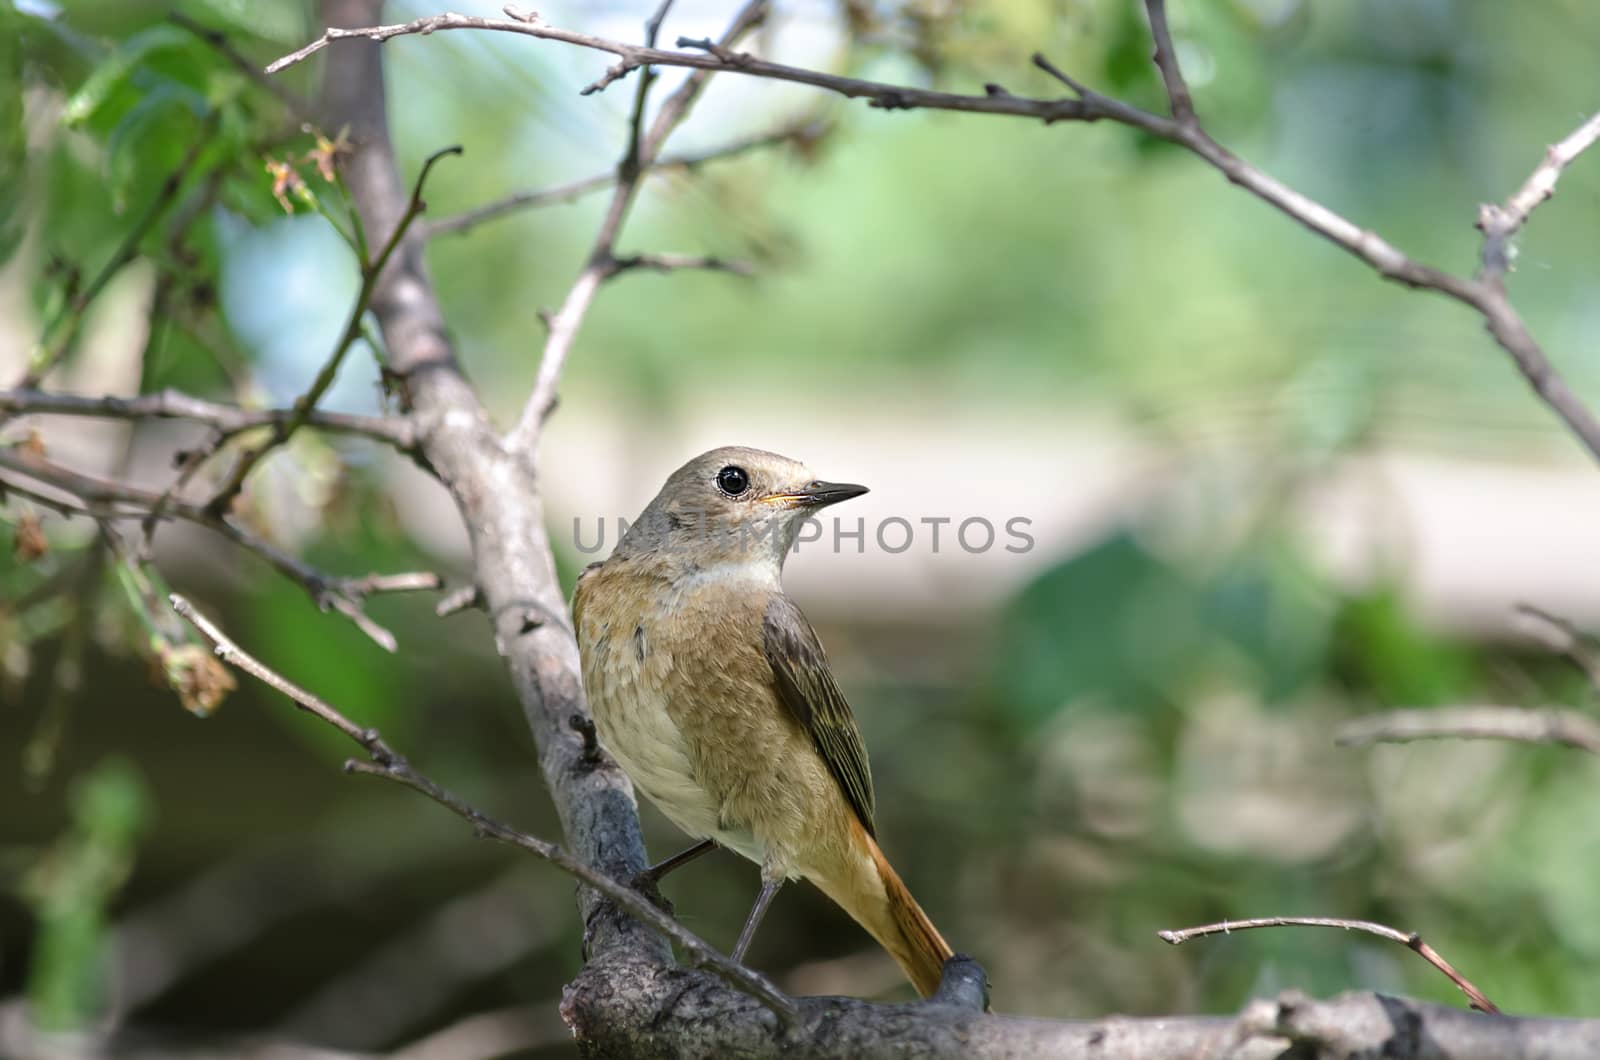 The female Redstart, sitting on a branch of a plum tree in the garden, bokeh and place for text